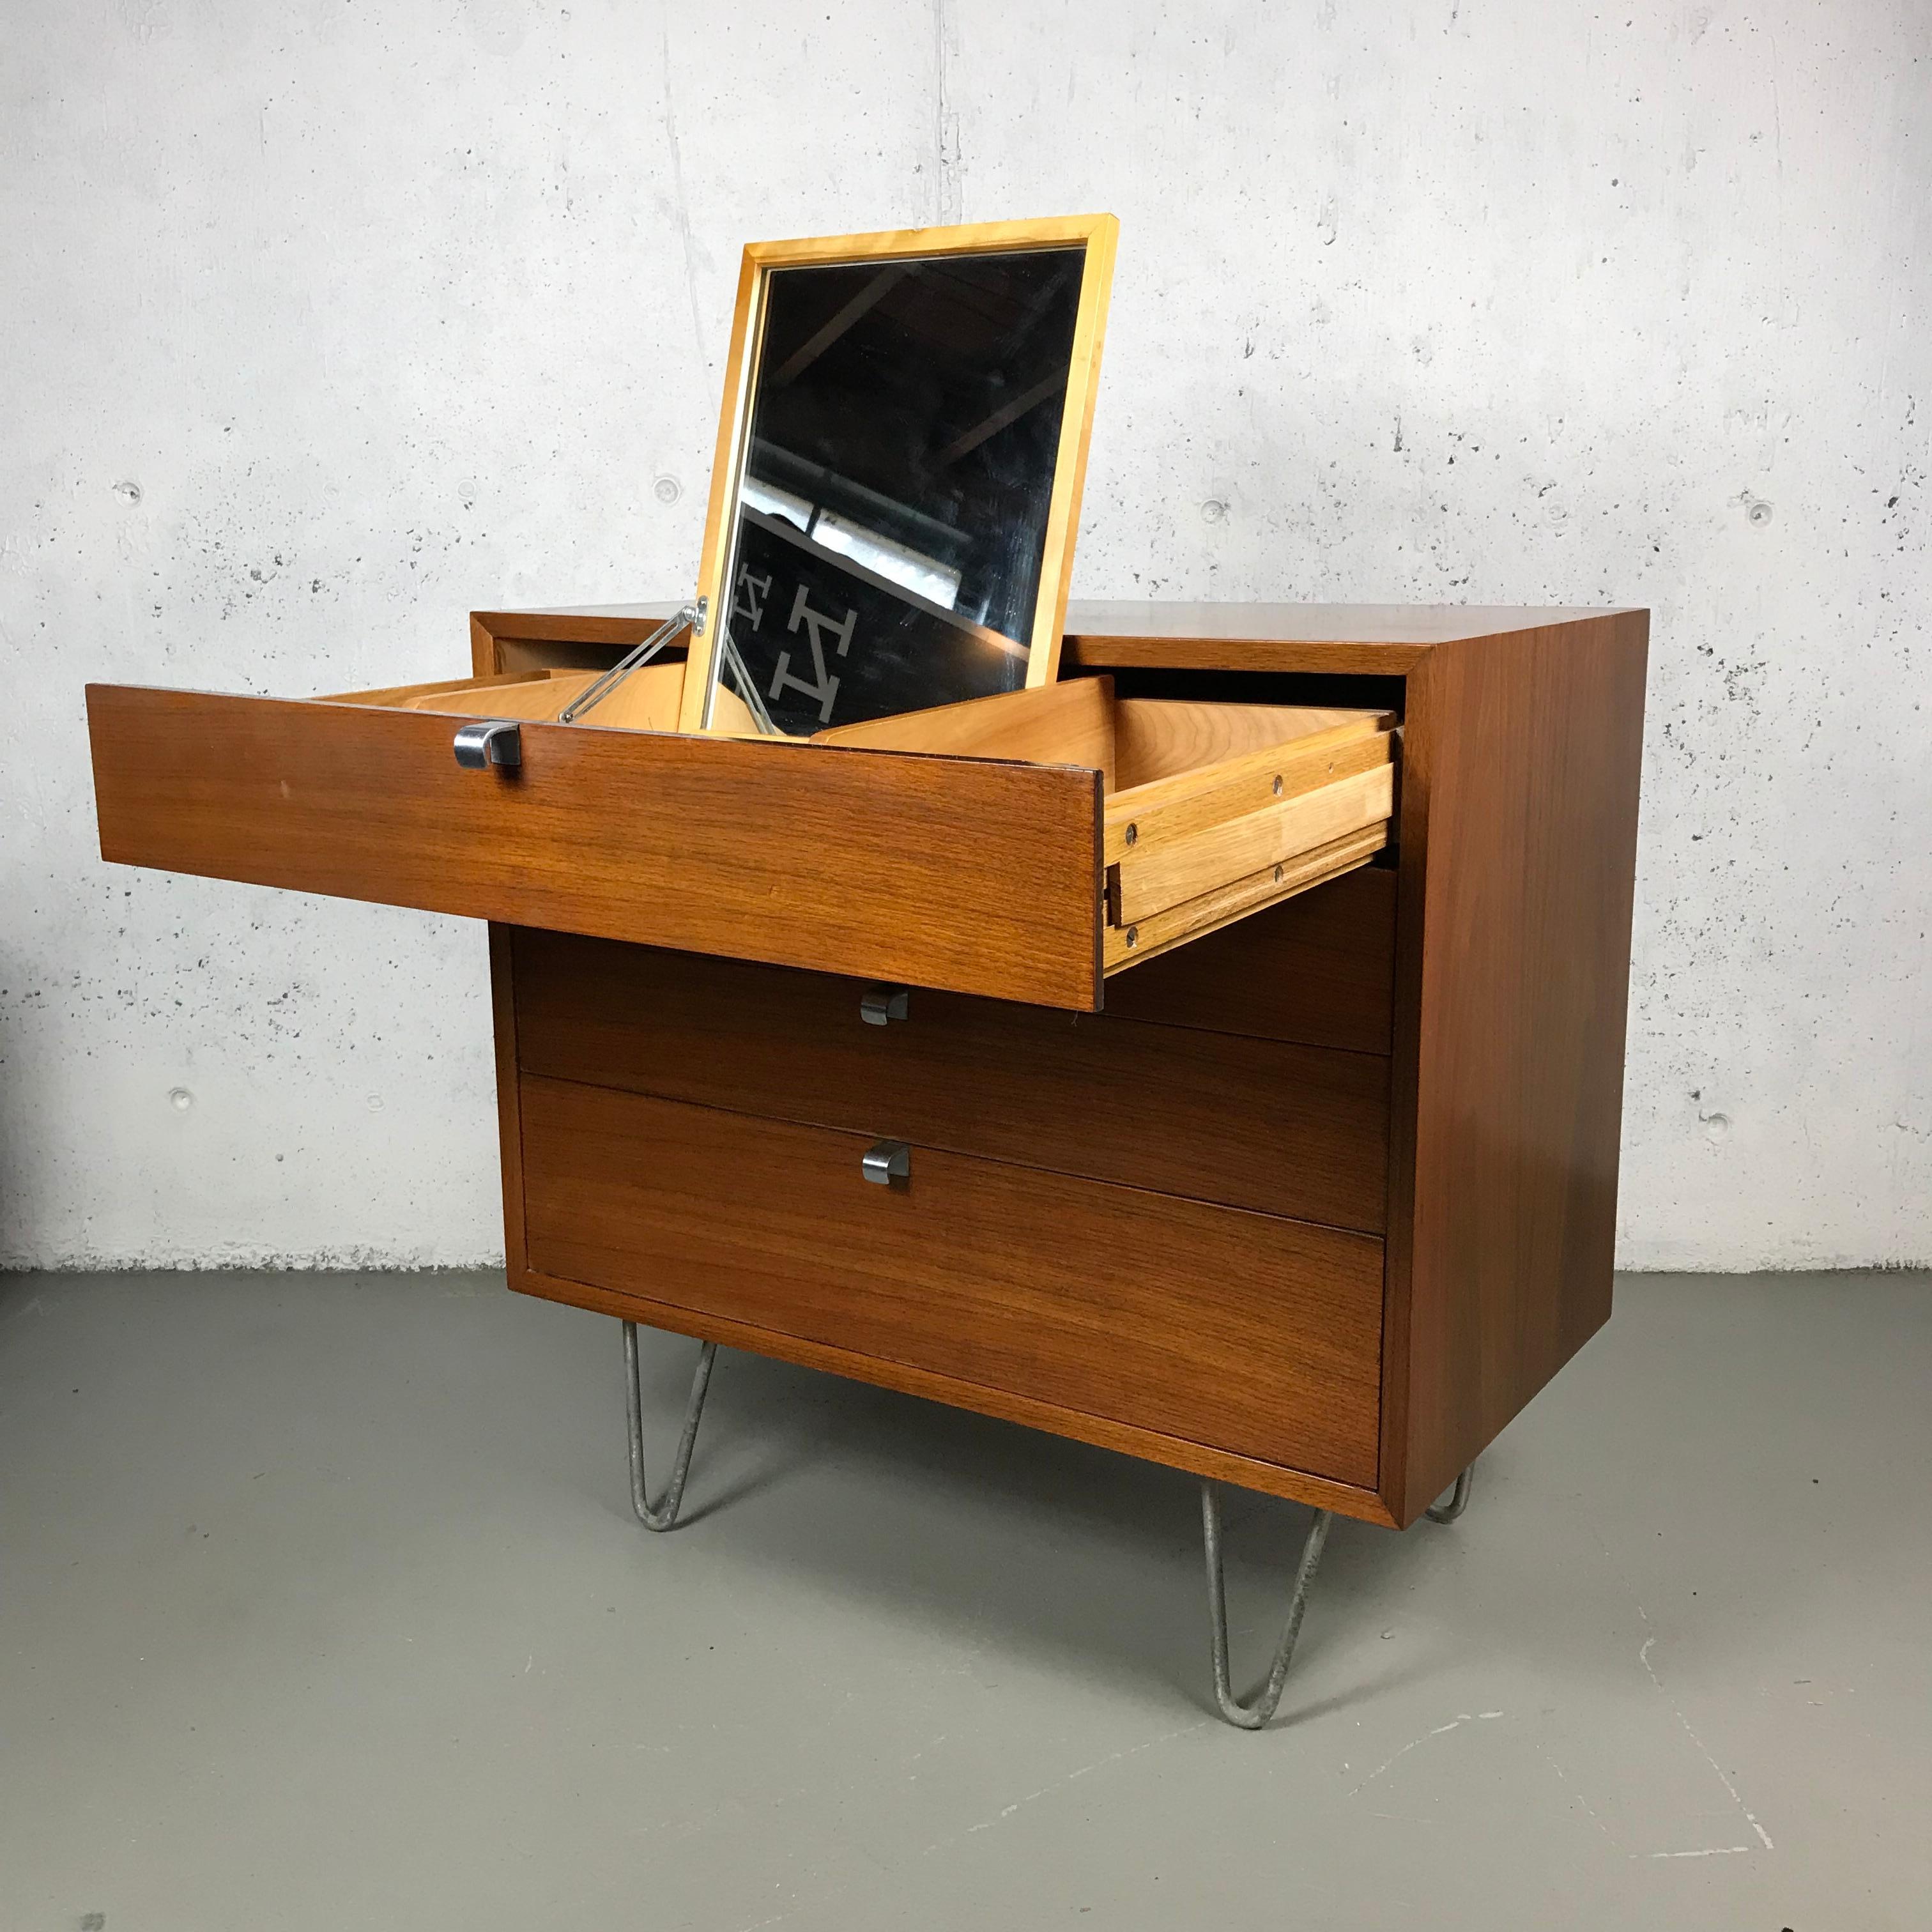 Early original George Nelson for Herman Miller, 1950s chest with drawer top movable vanity. This is a nice original example of one of the 1950s best designs: Nelson's use of his hairpin legs that he designed. The original foil label is present in